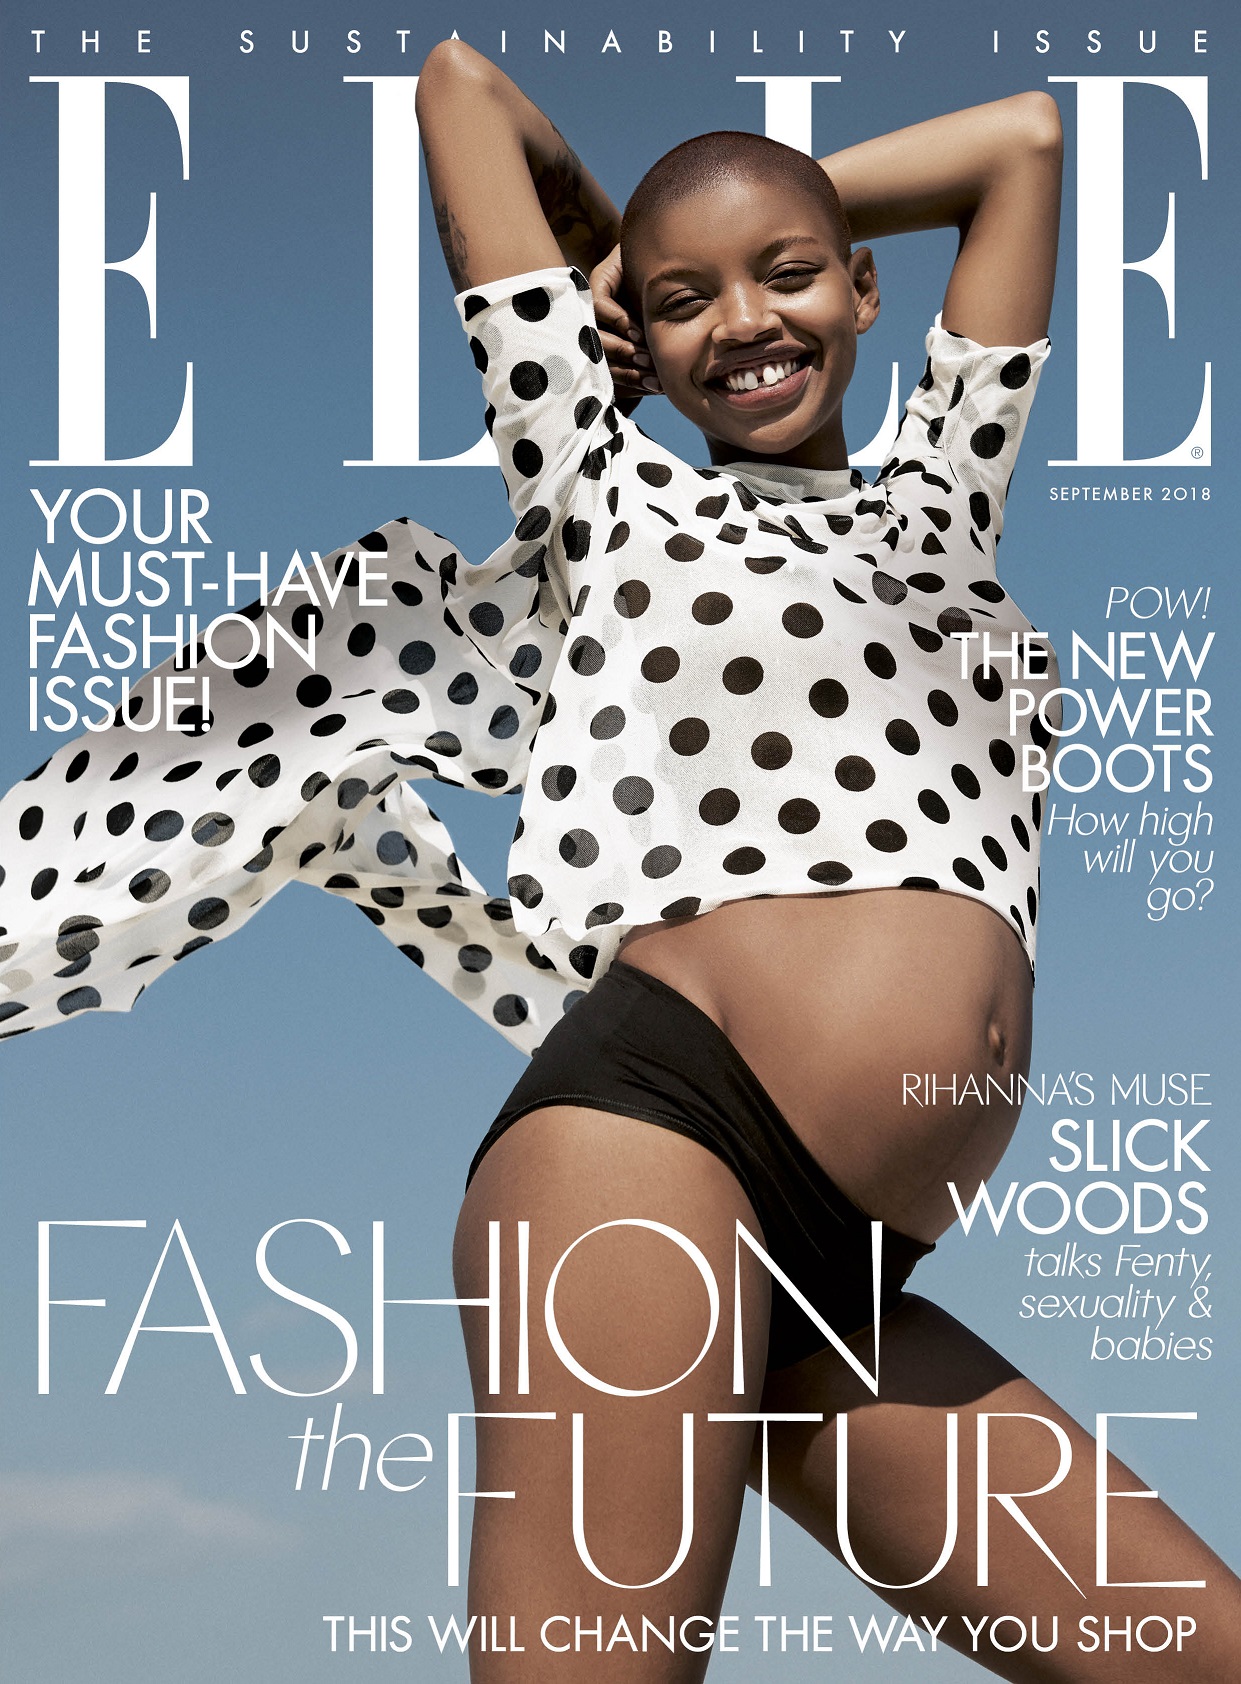 ELLE UK appoints Acting Deputy Editor and Associate Editor/Culture